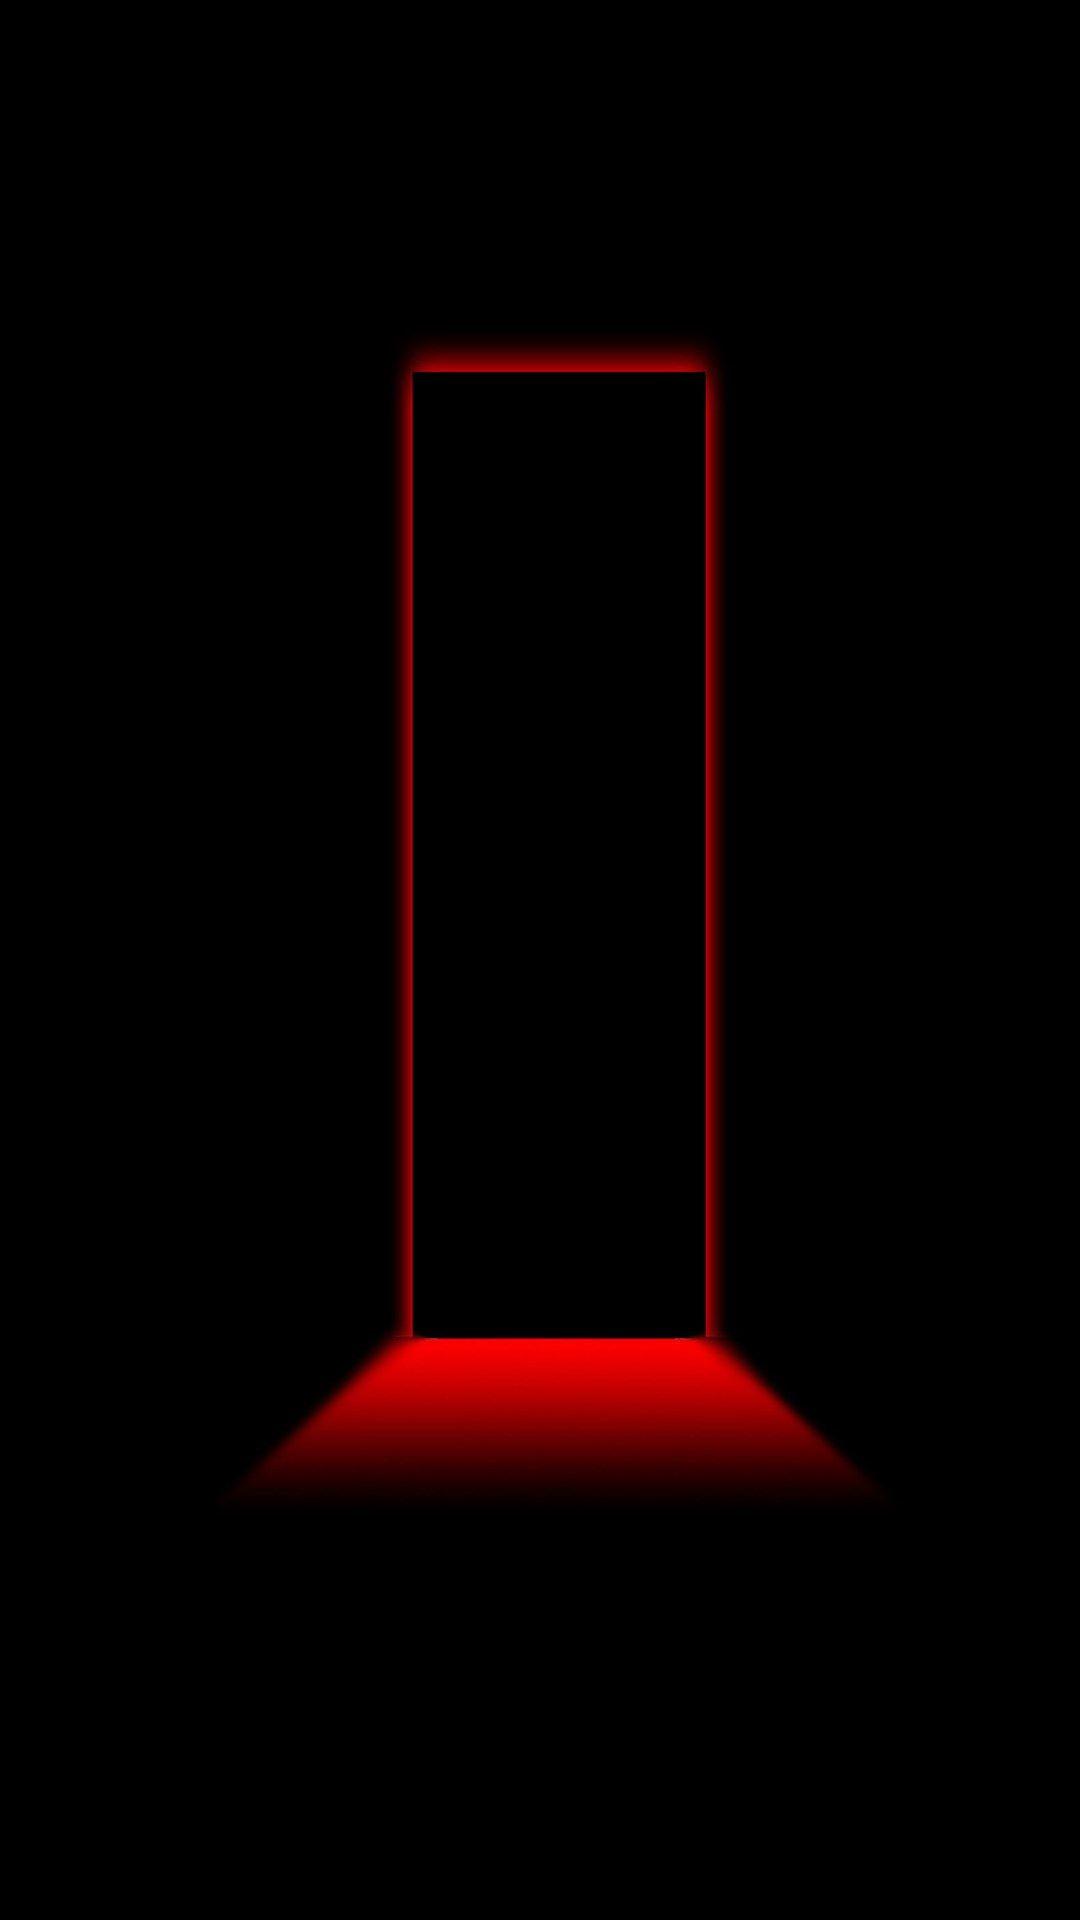 3D black and red line iphone 5s HD wallpaper free download. Seni